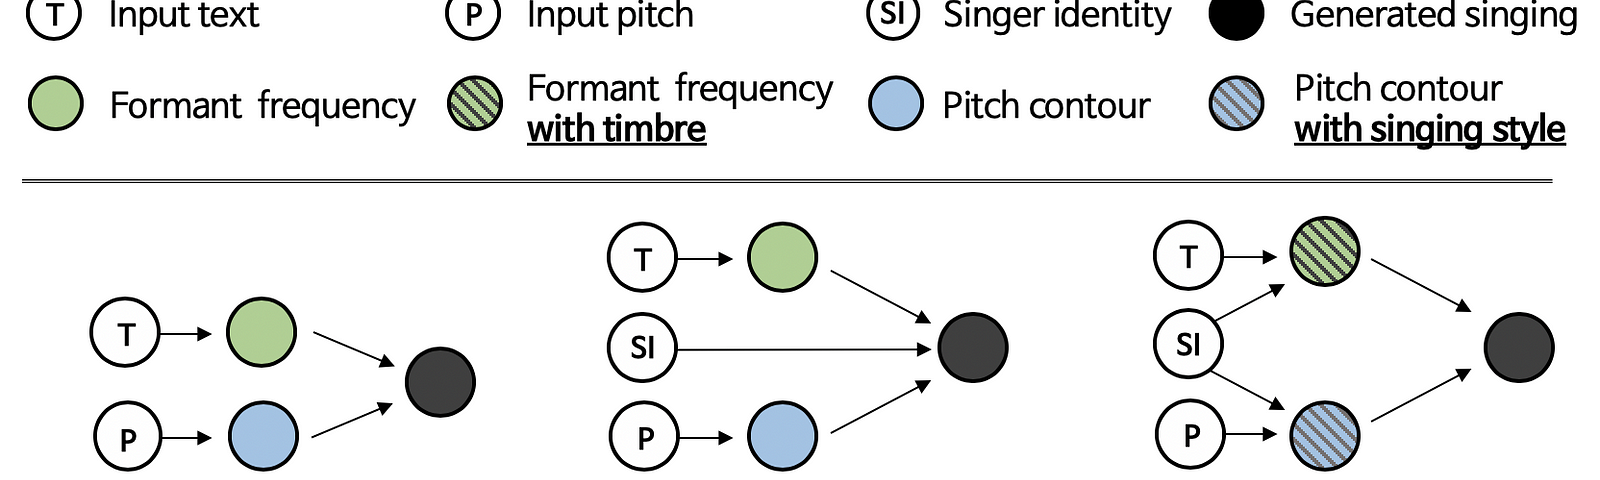 Proposed method to reflect singer identity in multi-singer SVS system, compared to existing methods